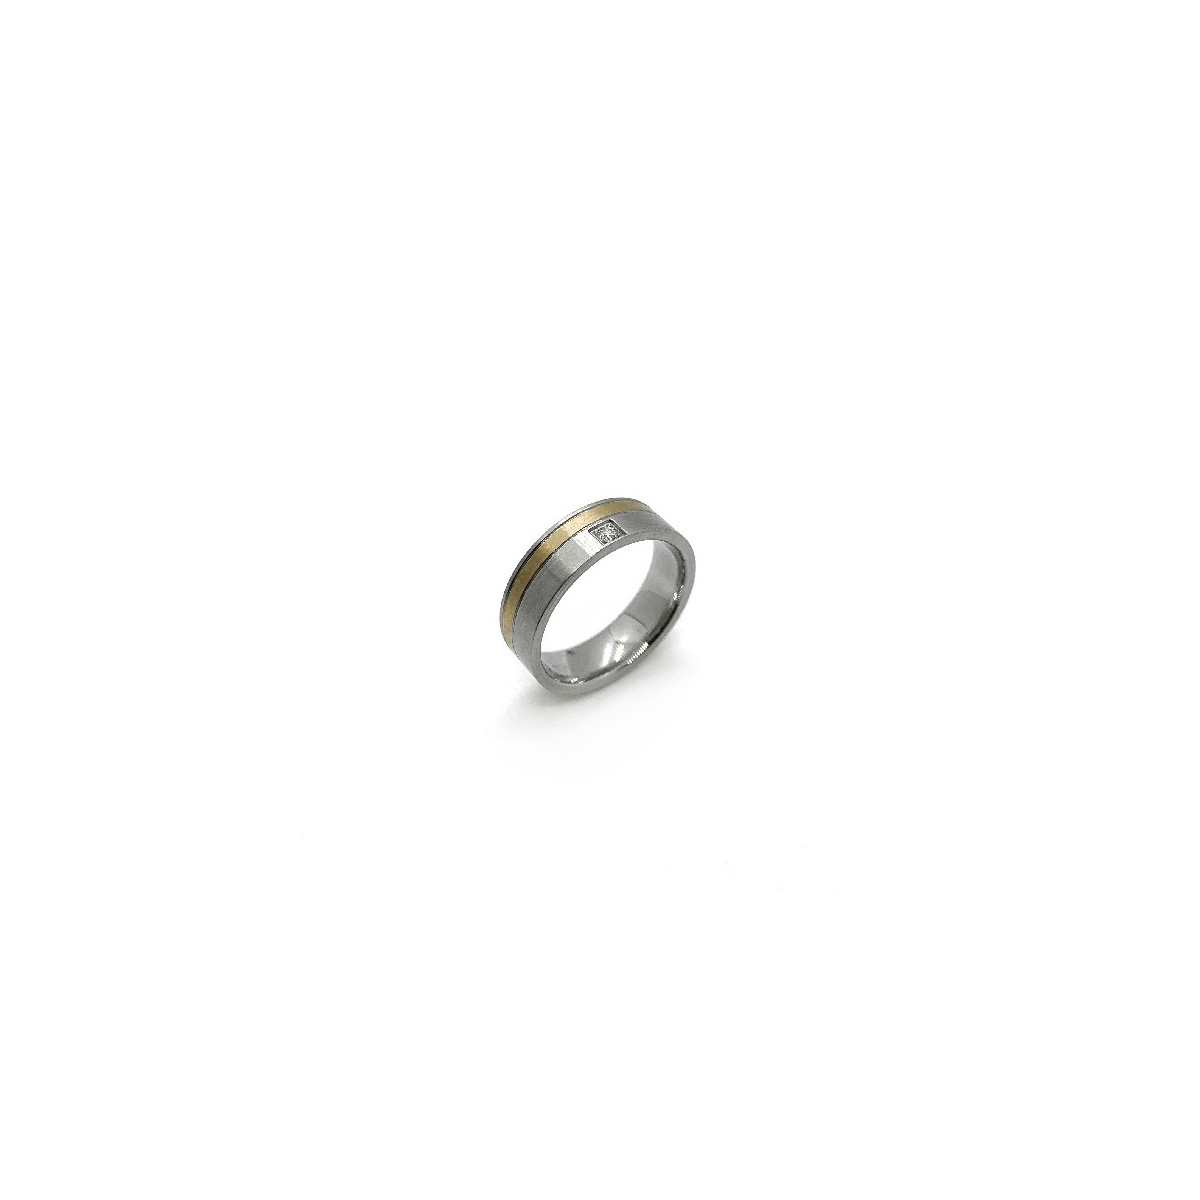 DIAMOND STEEL AND GOLD TENO RING - 068.13P01.D30.55